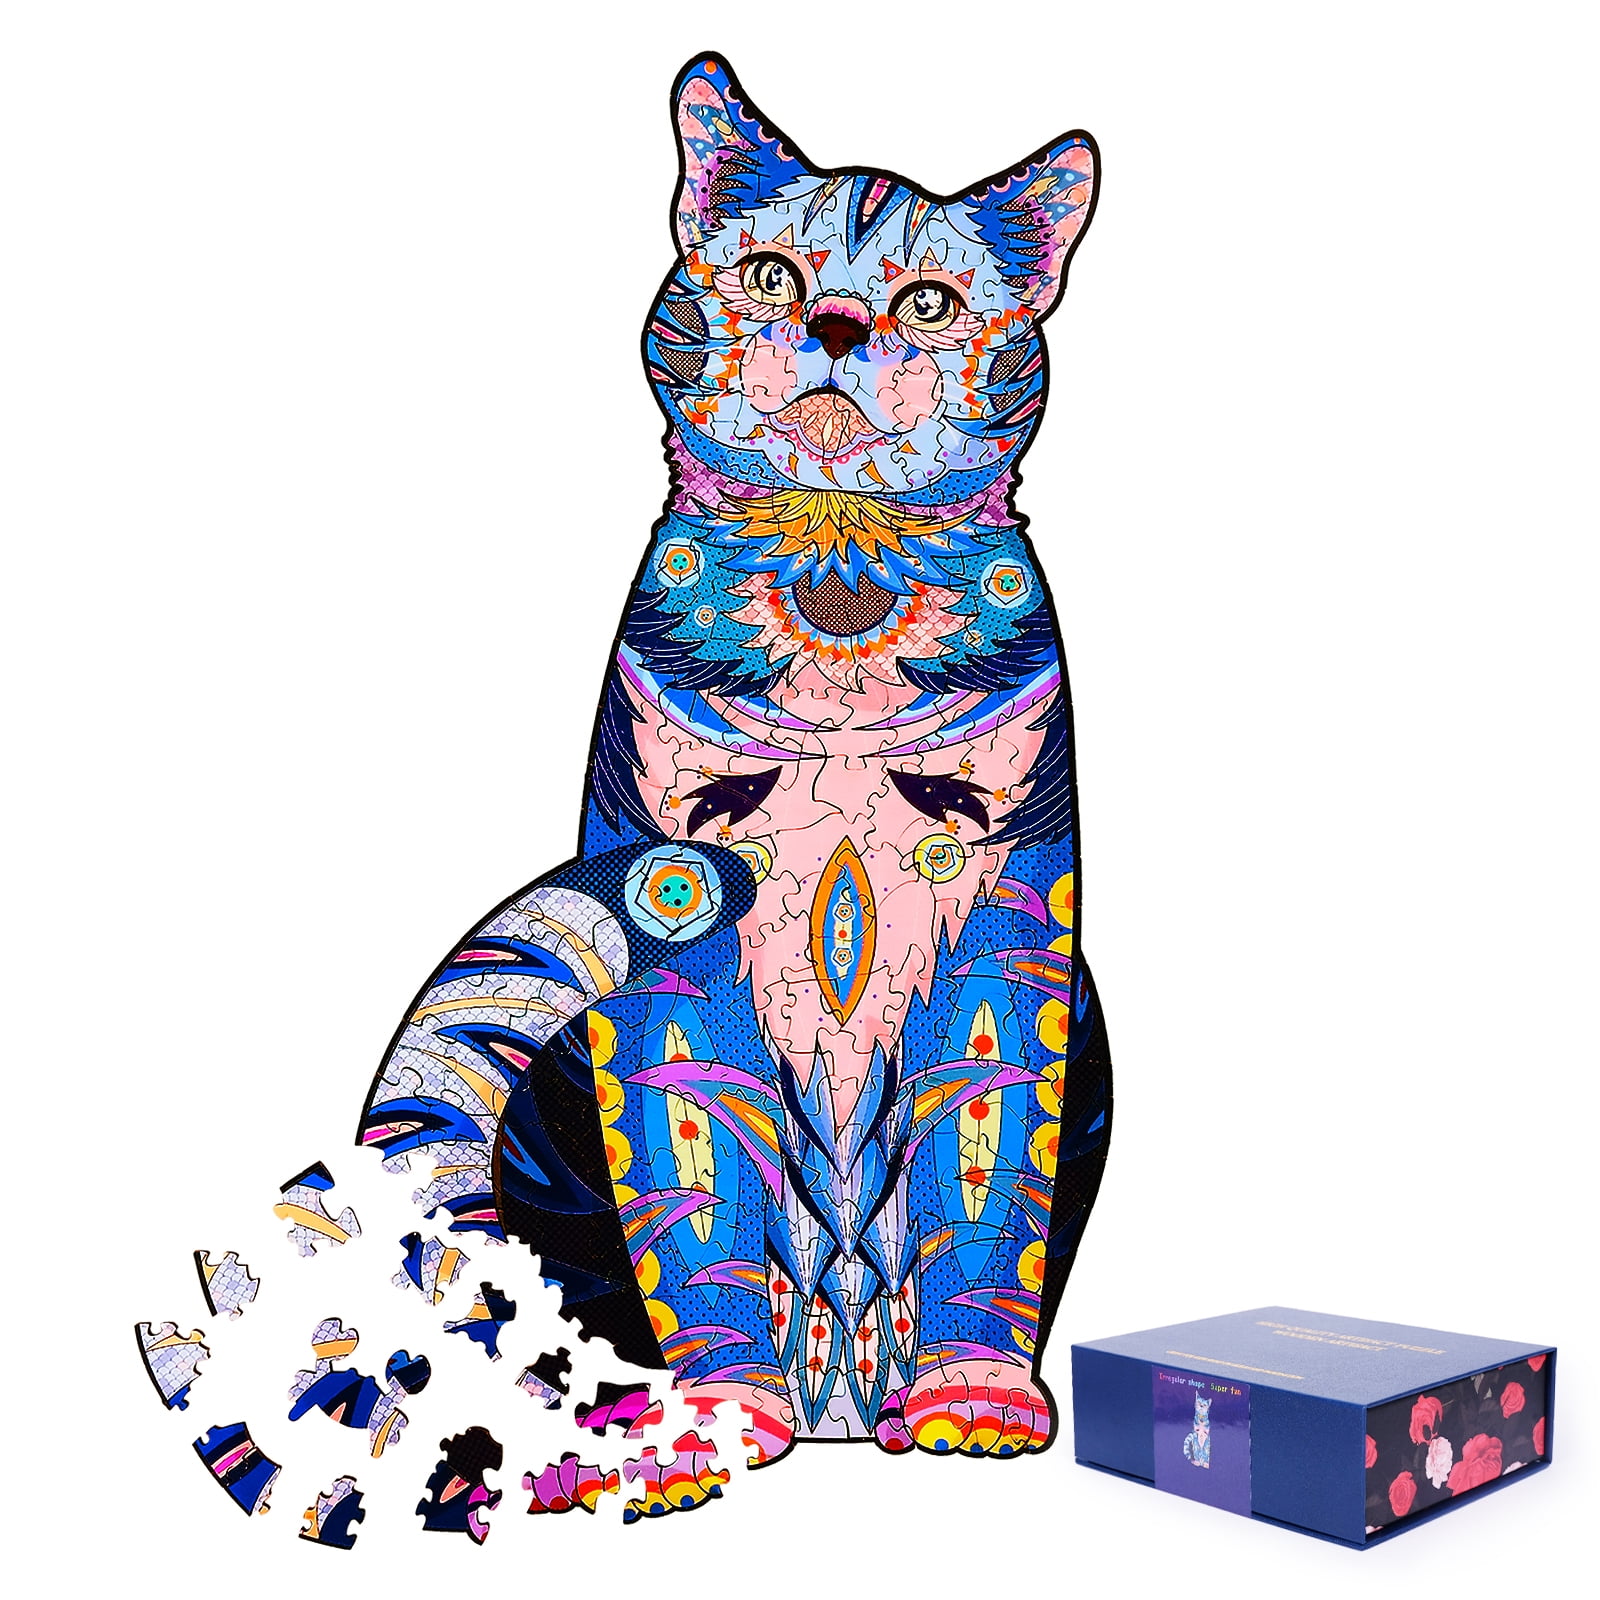 Casual Cat 1000 Piece Jigsaw Puzzle For Adults Kids Learning Education Game Gift 